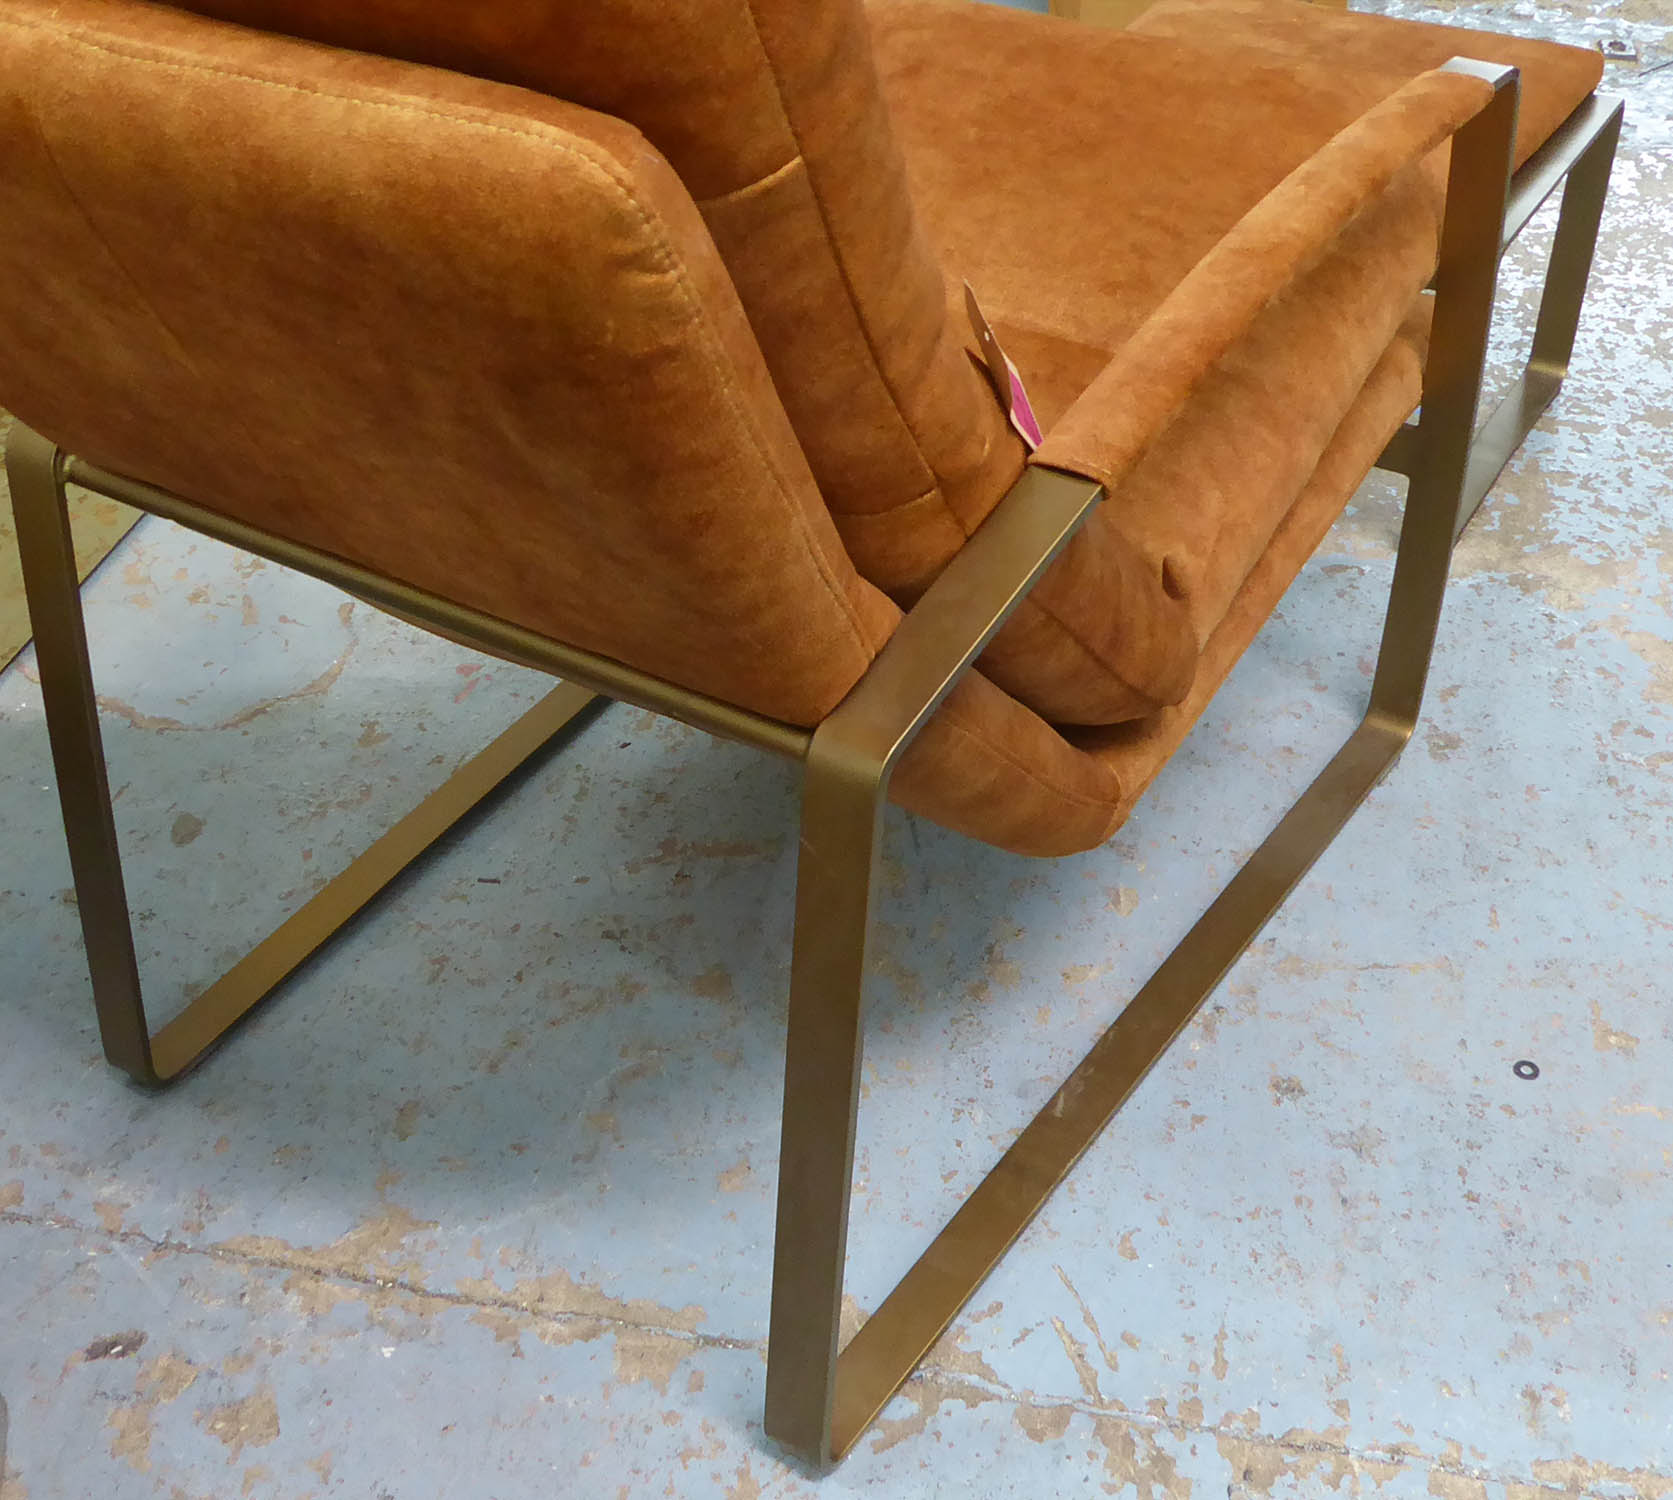 ARMCHAIR AND STOOL, 1970's Italian style bronzed metal with mustard upholstery, 65cm W X 94cm D x - Image 7 of 9